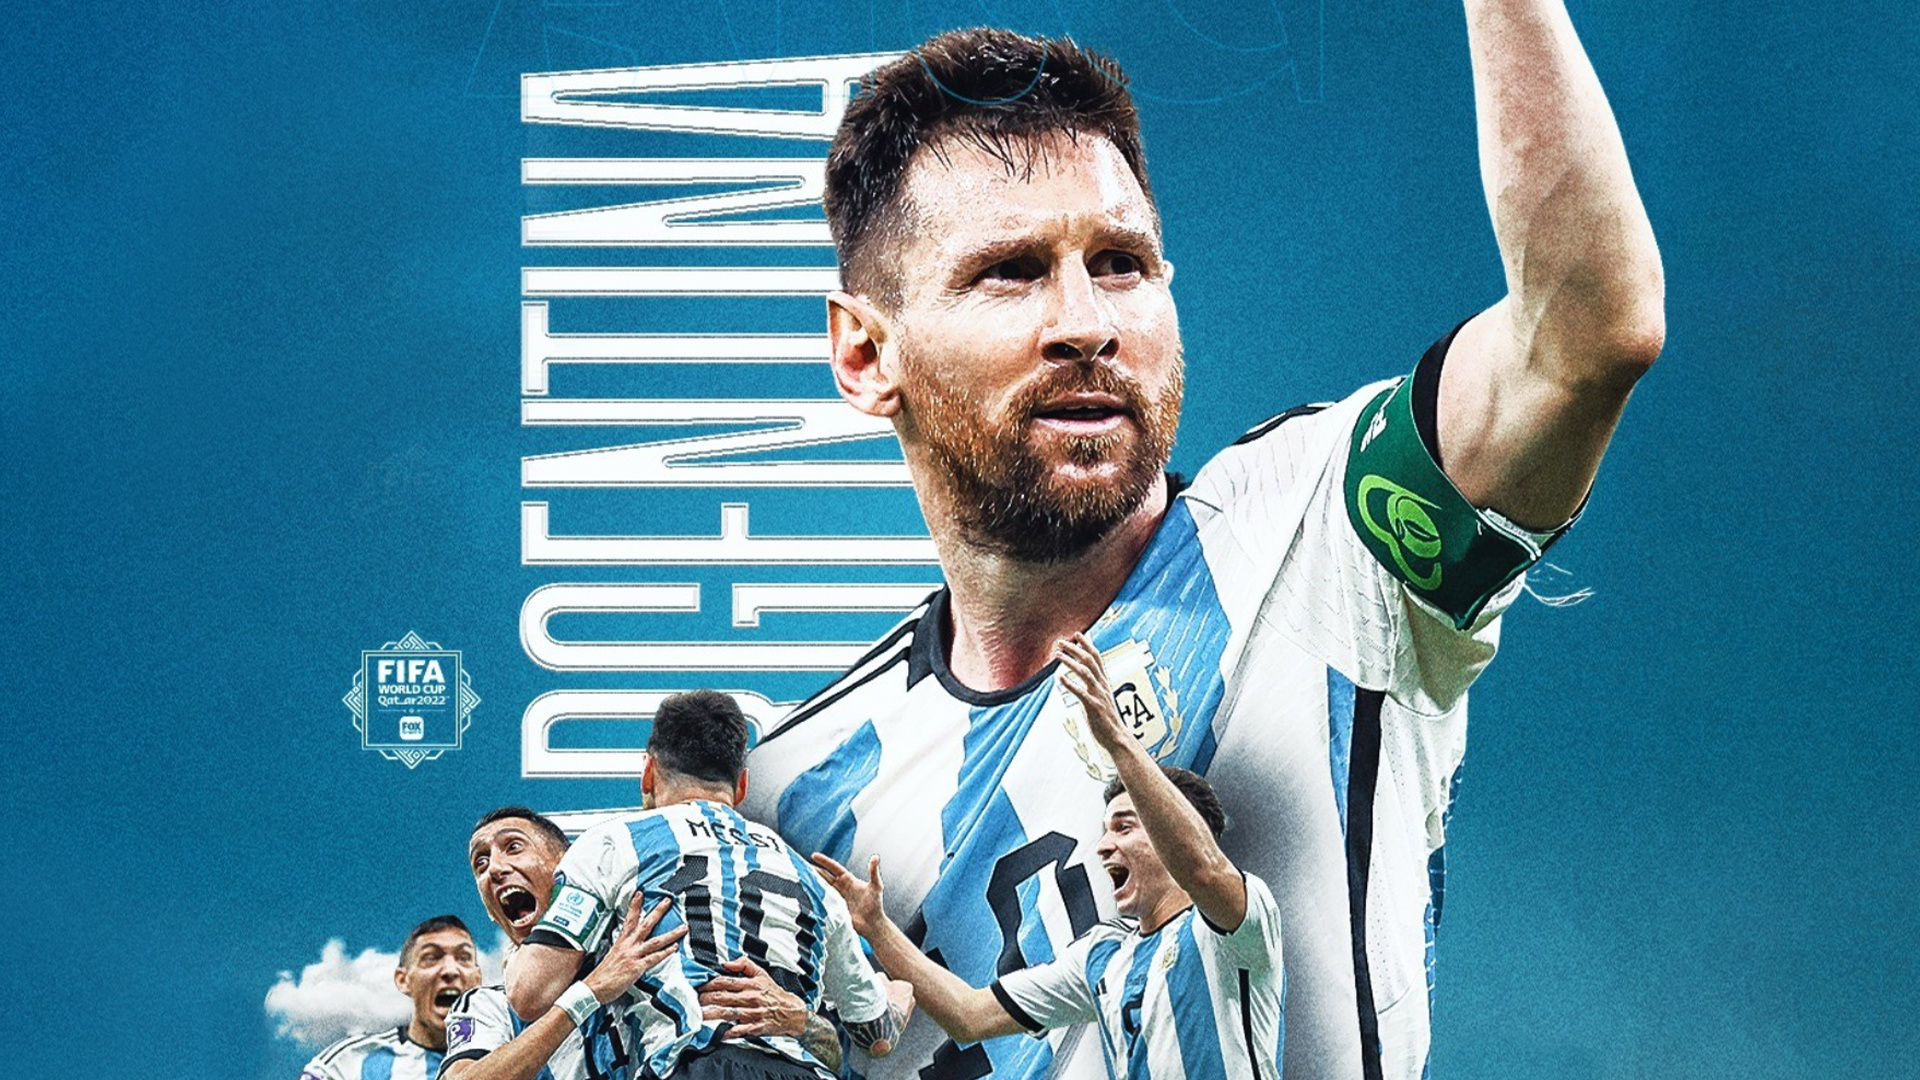 World Cup 2022 highlights: Messi sparks Argentina to 2-0 win over Mexico